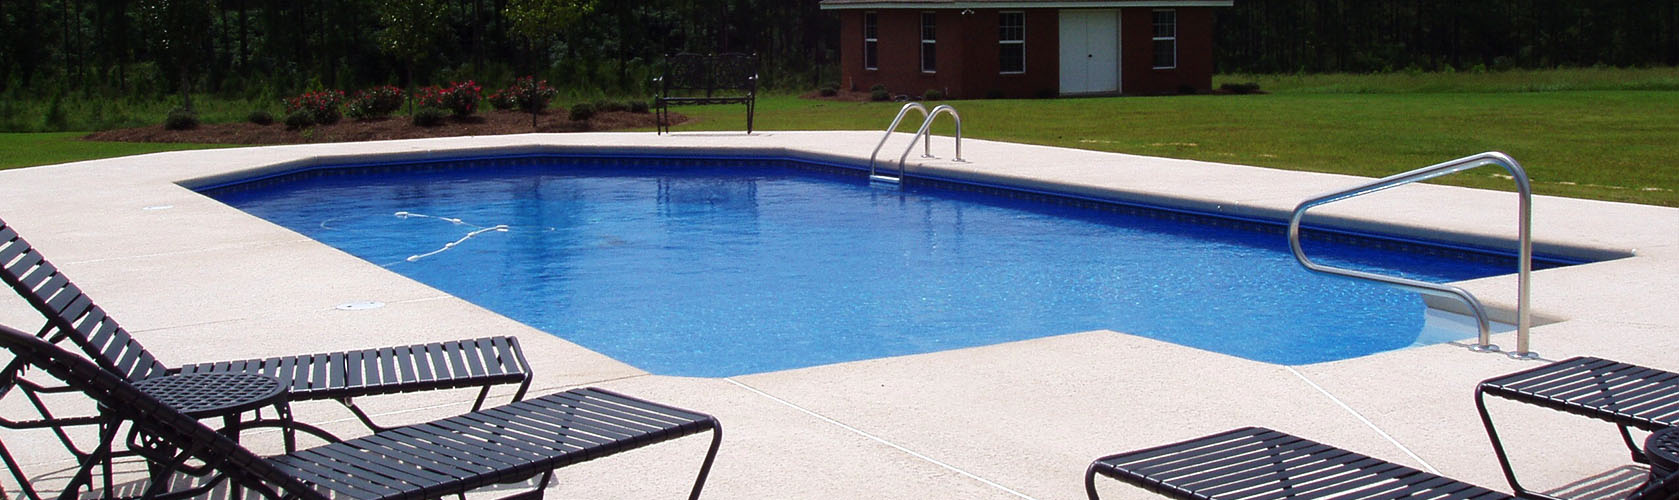 A newly completed in-ground pool!